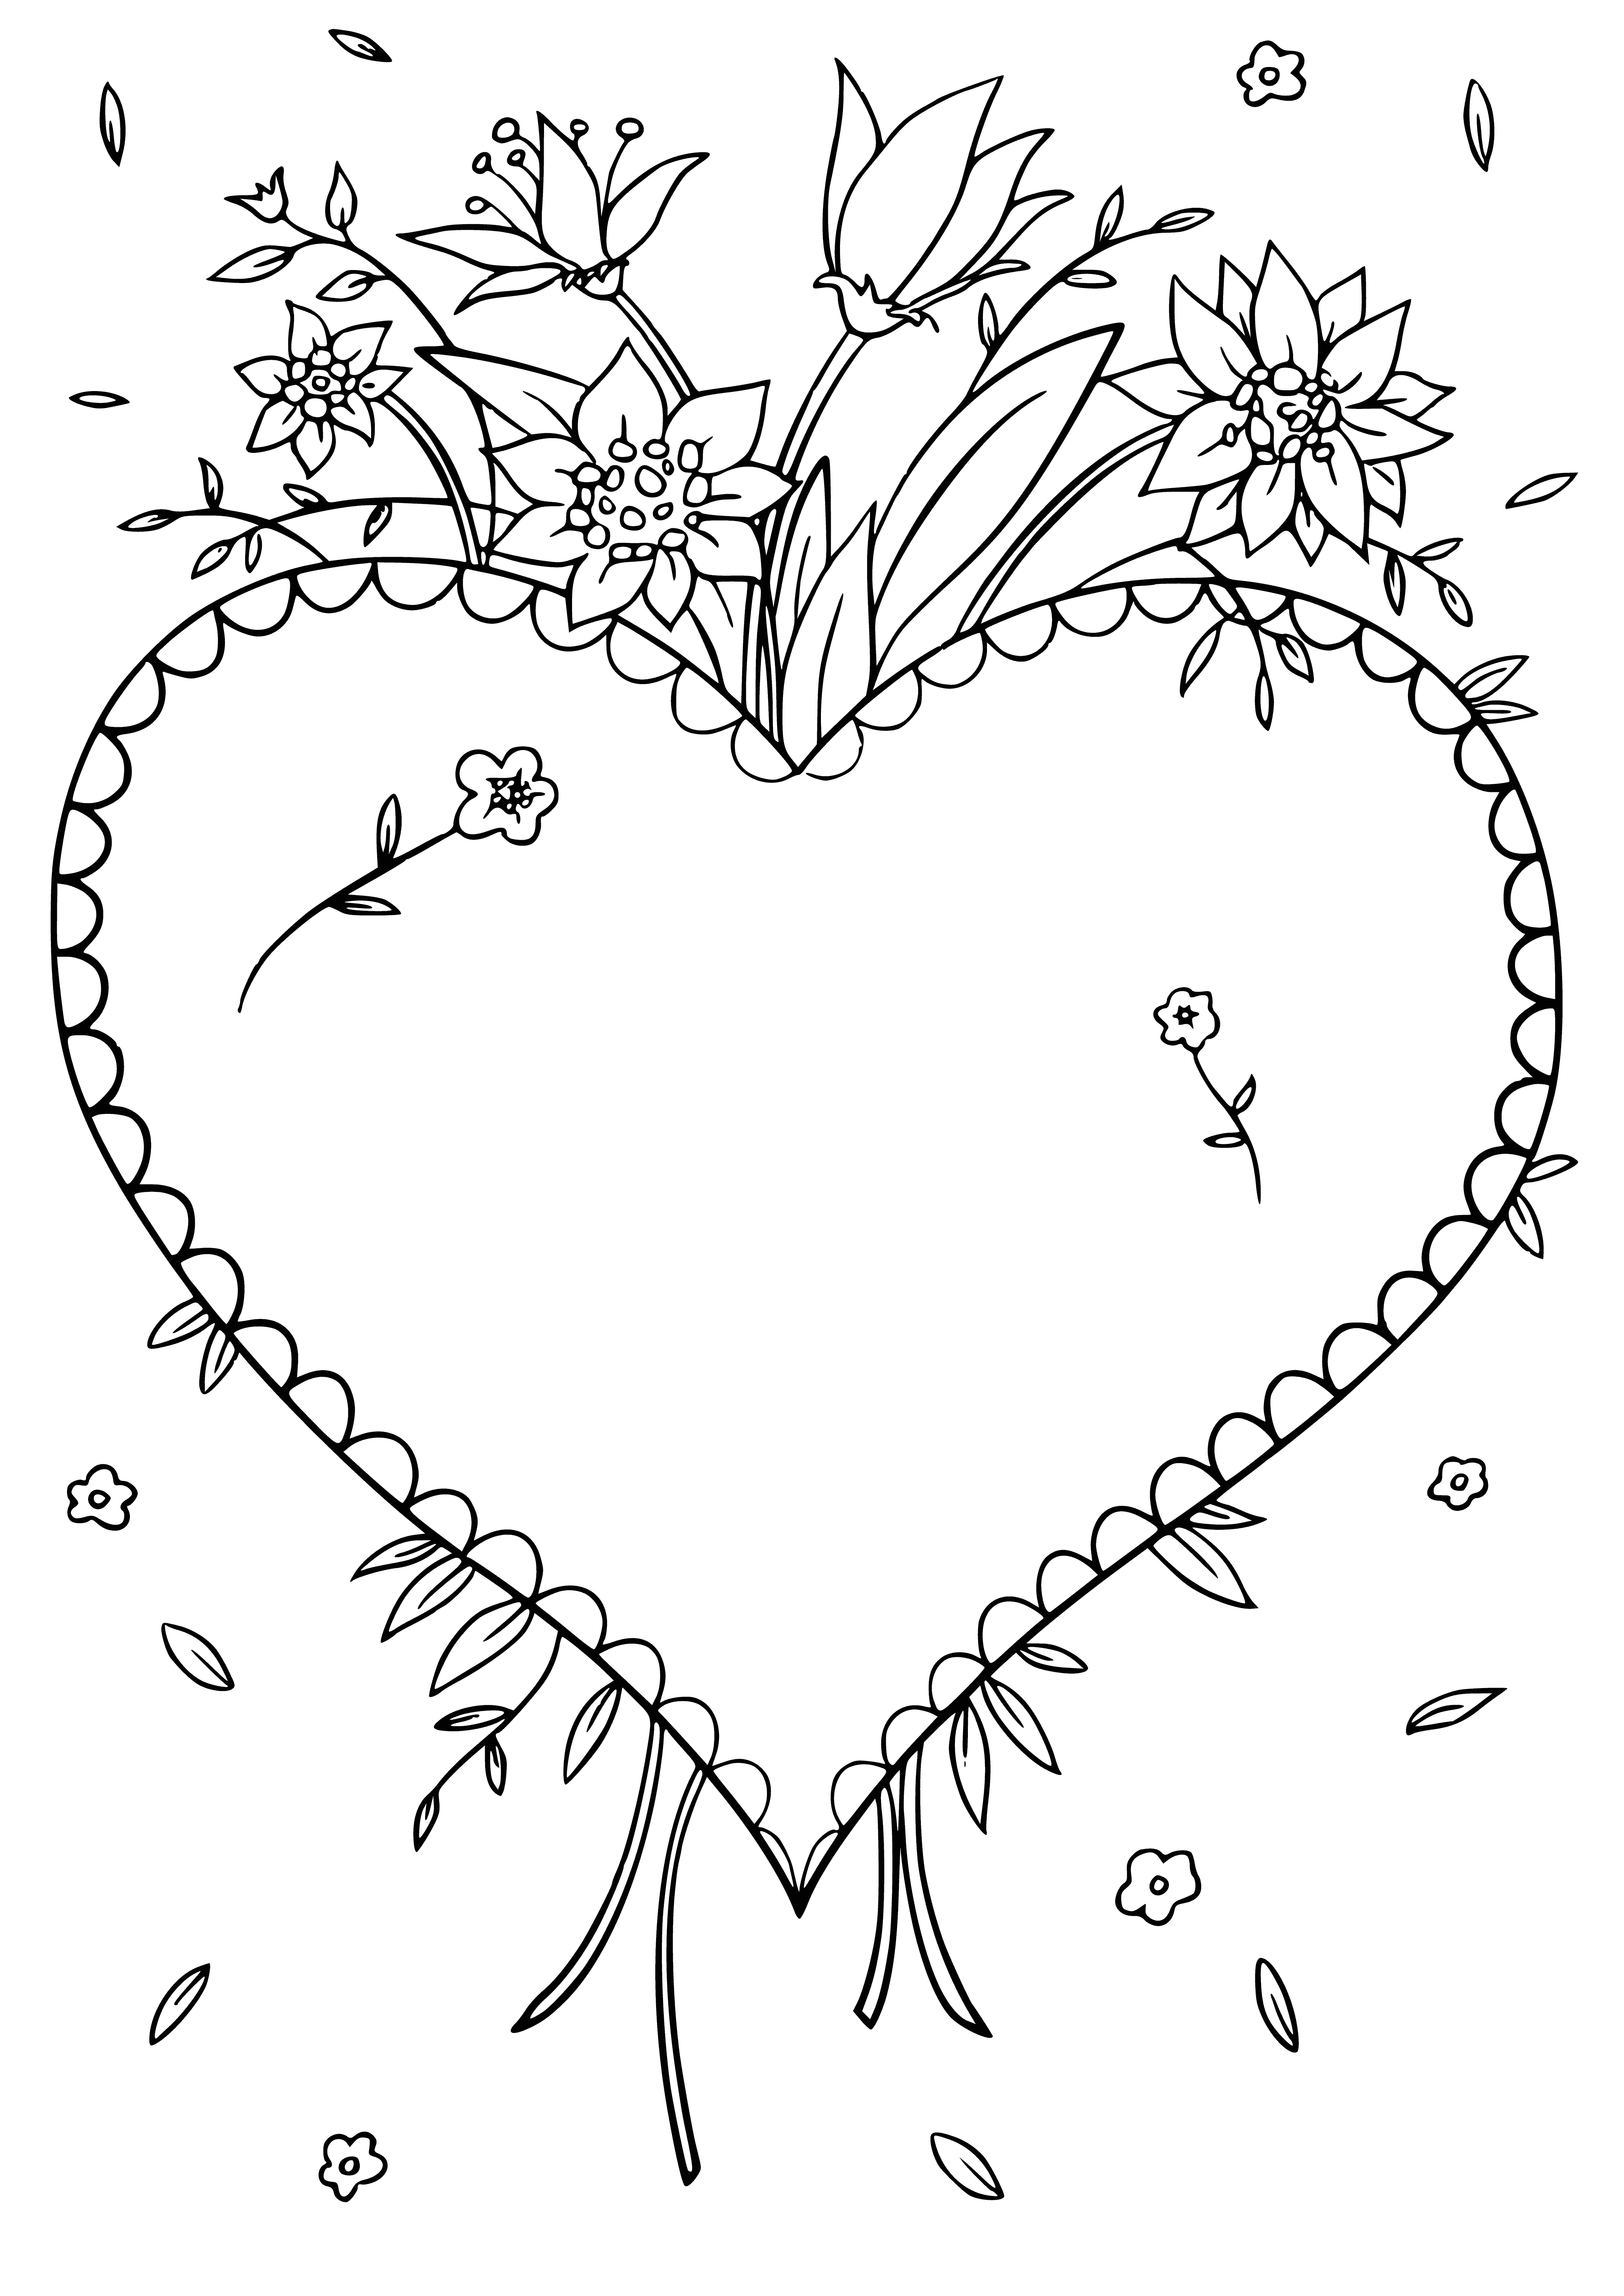 coloring page: A red & pink heart shaped surrounded by smaller hearts on a light pink background. #ValentinesDay